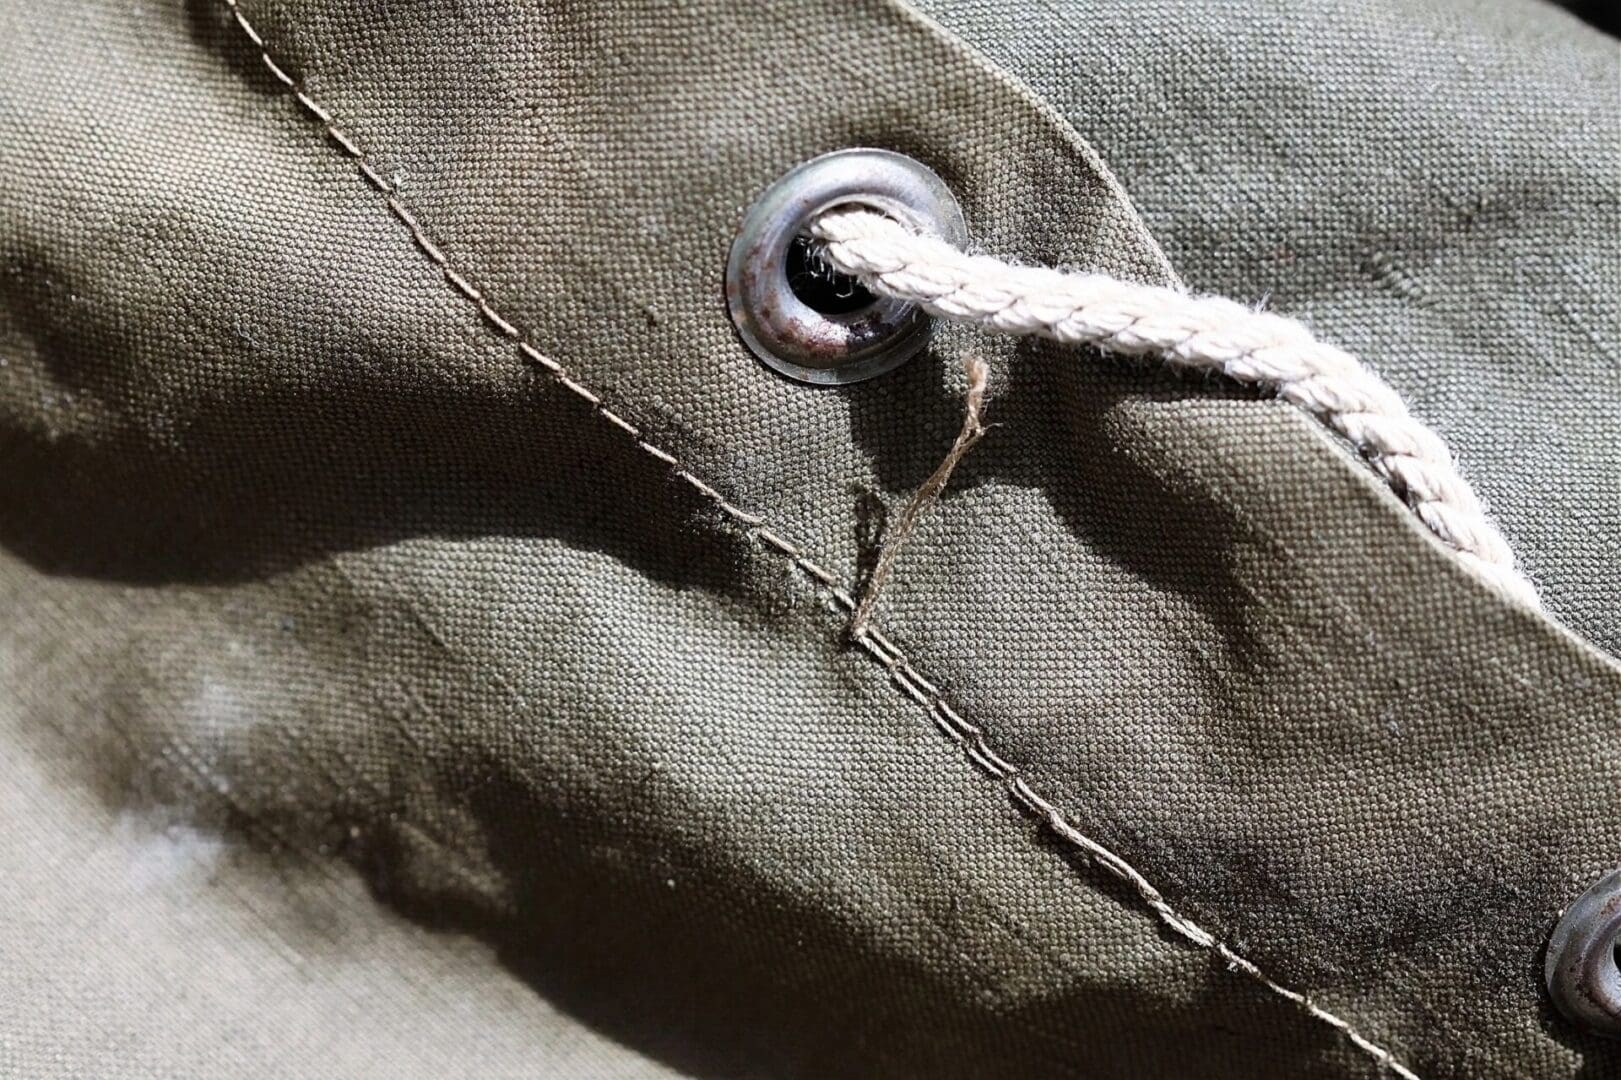 A close up of a knot on a green canvas bag.